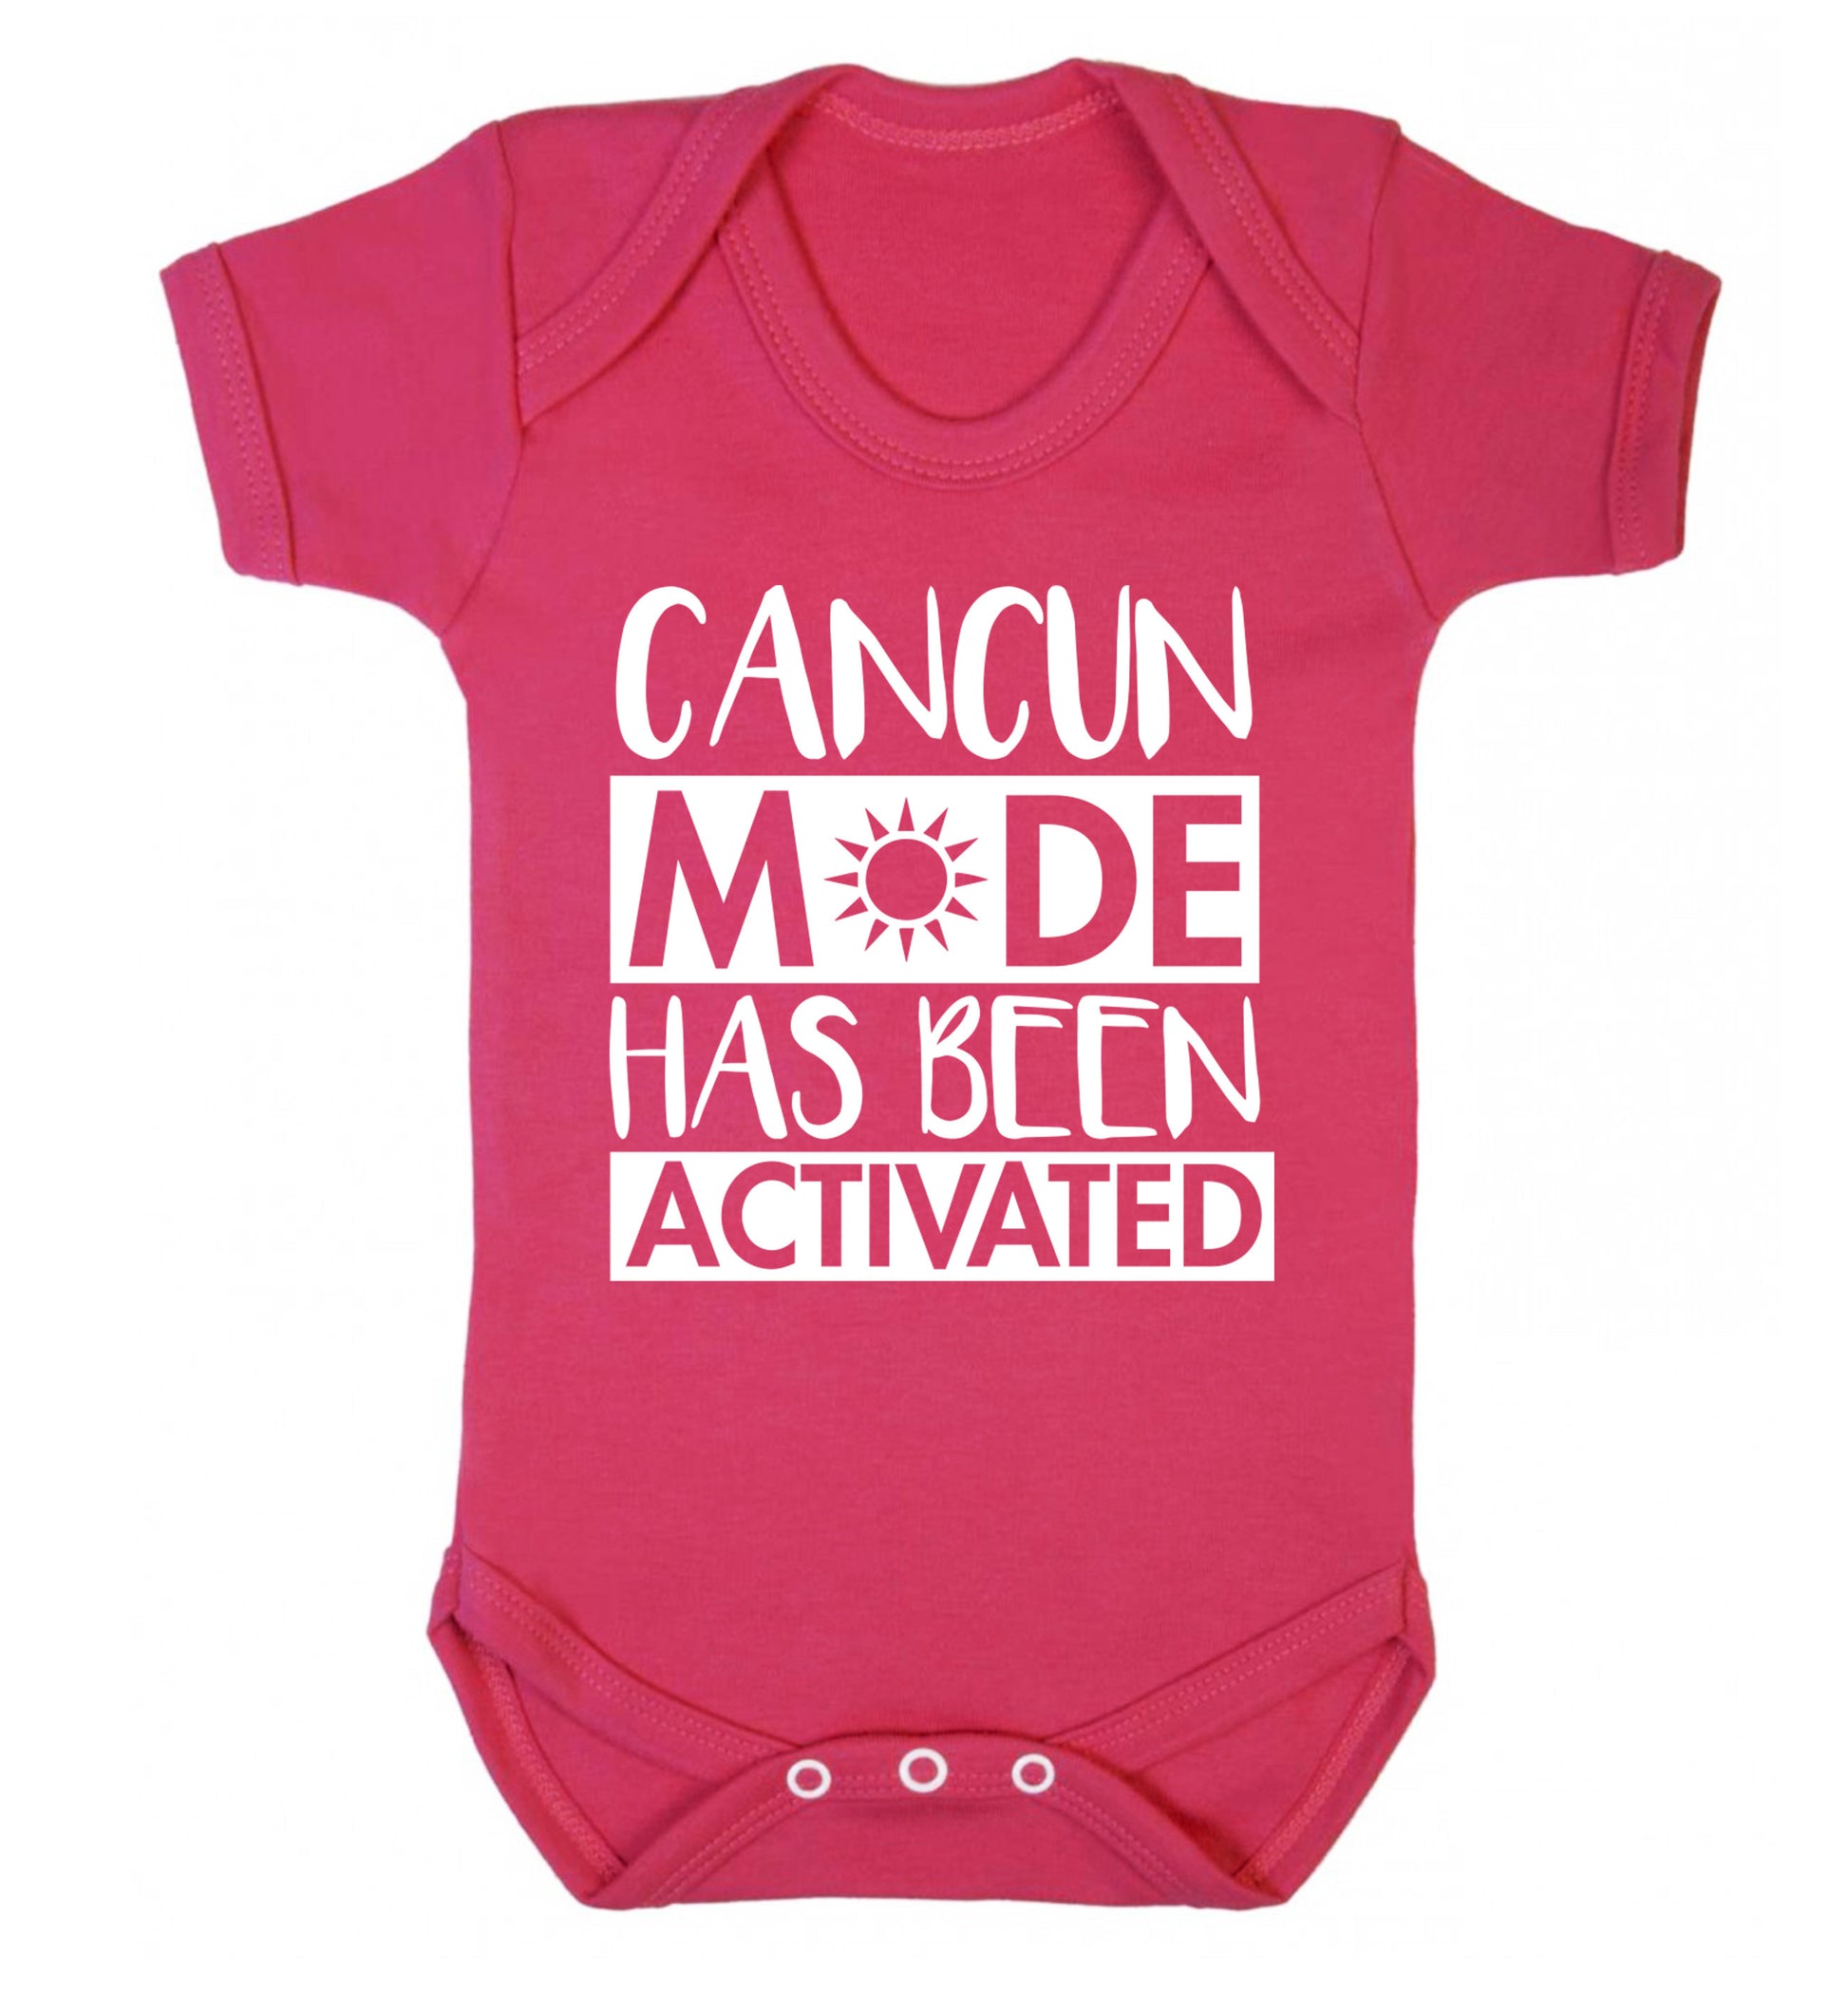 Cancun mode has been activated Baby Vest dark pink 18-24 months